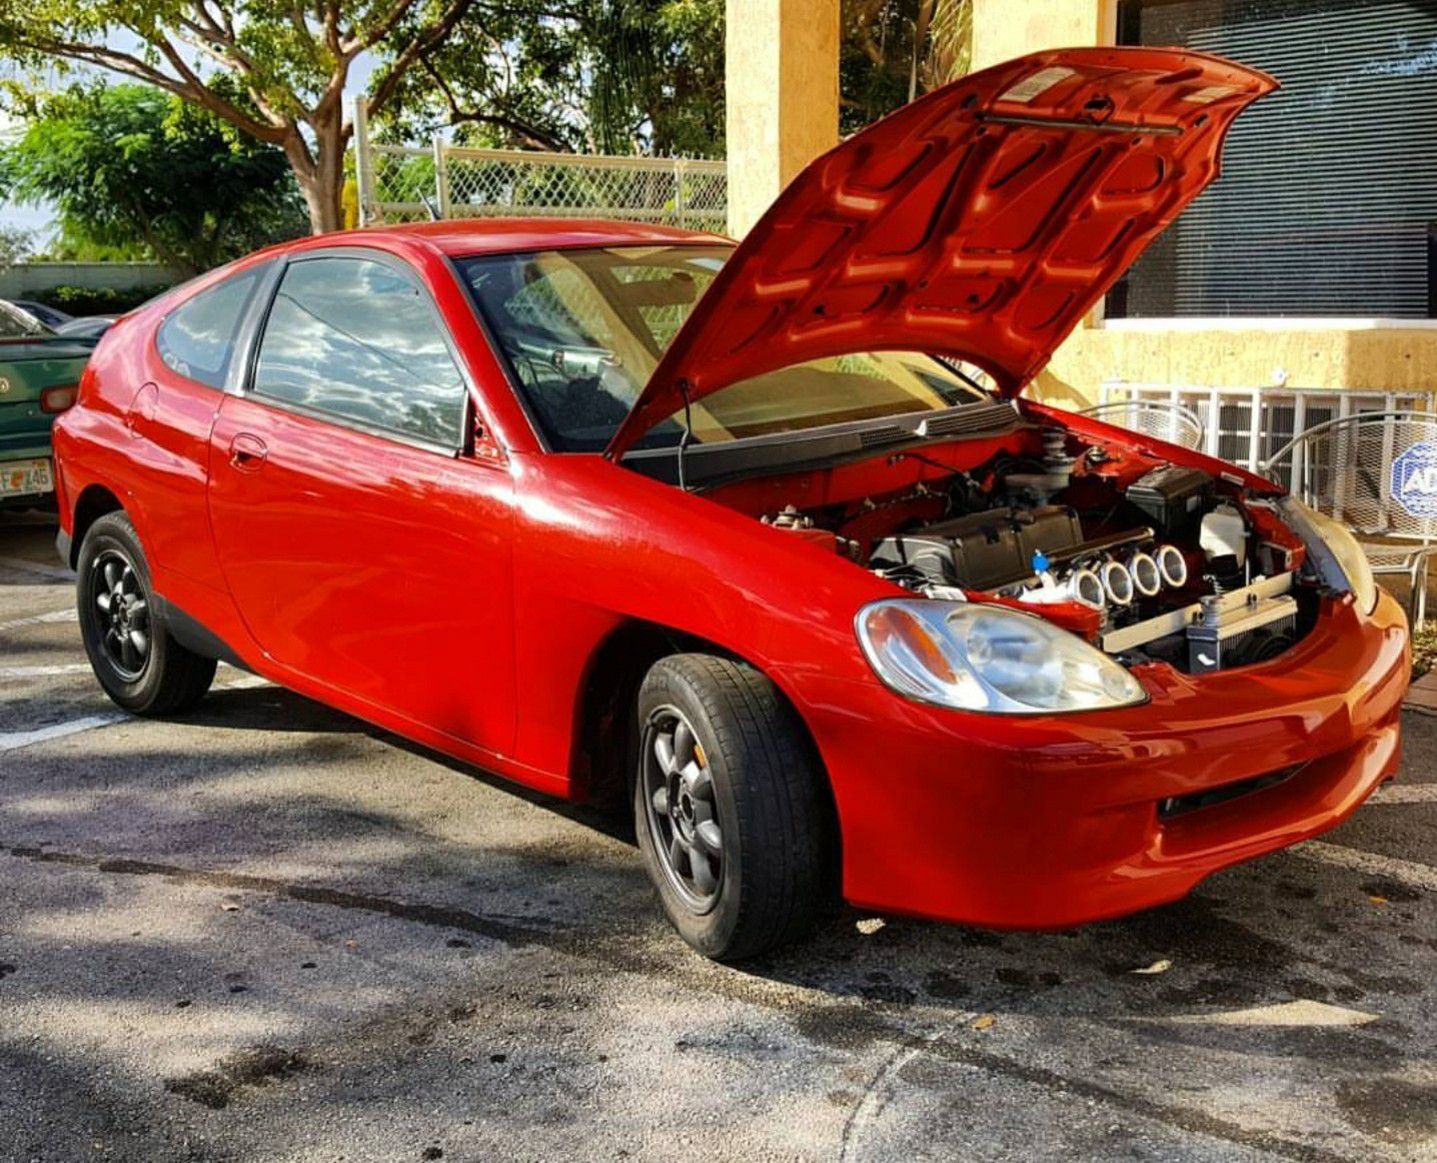 2001 Honda Insight rolling shell... no engine/trans... comes with Innovative K series engine mounts (paid $550 for mounts)...